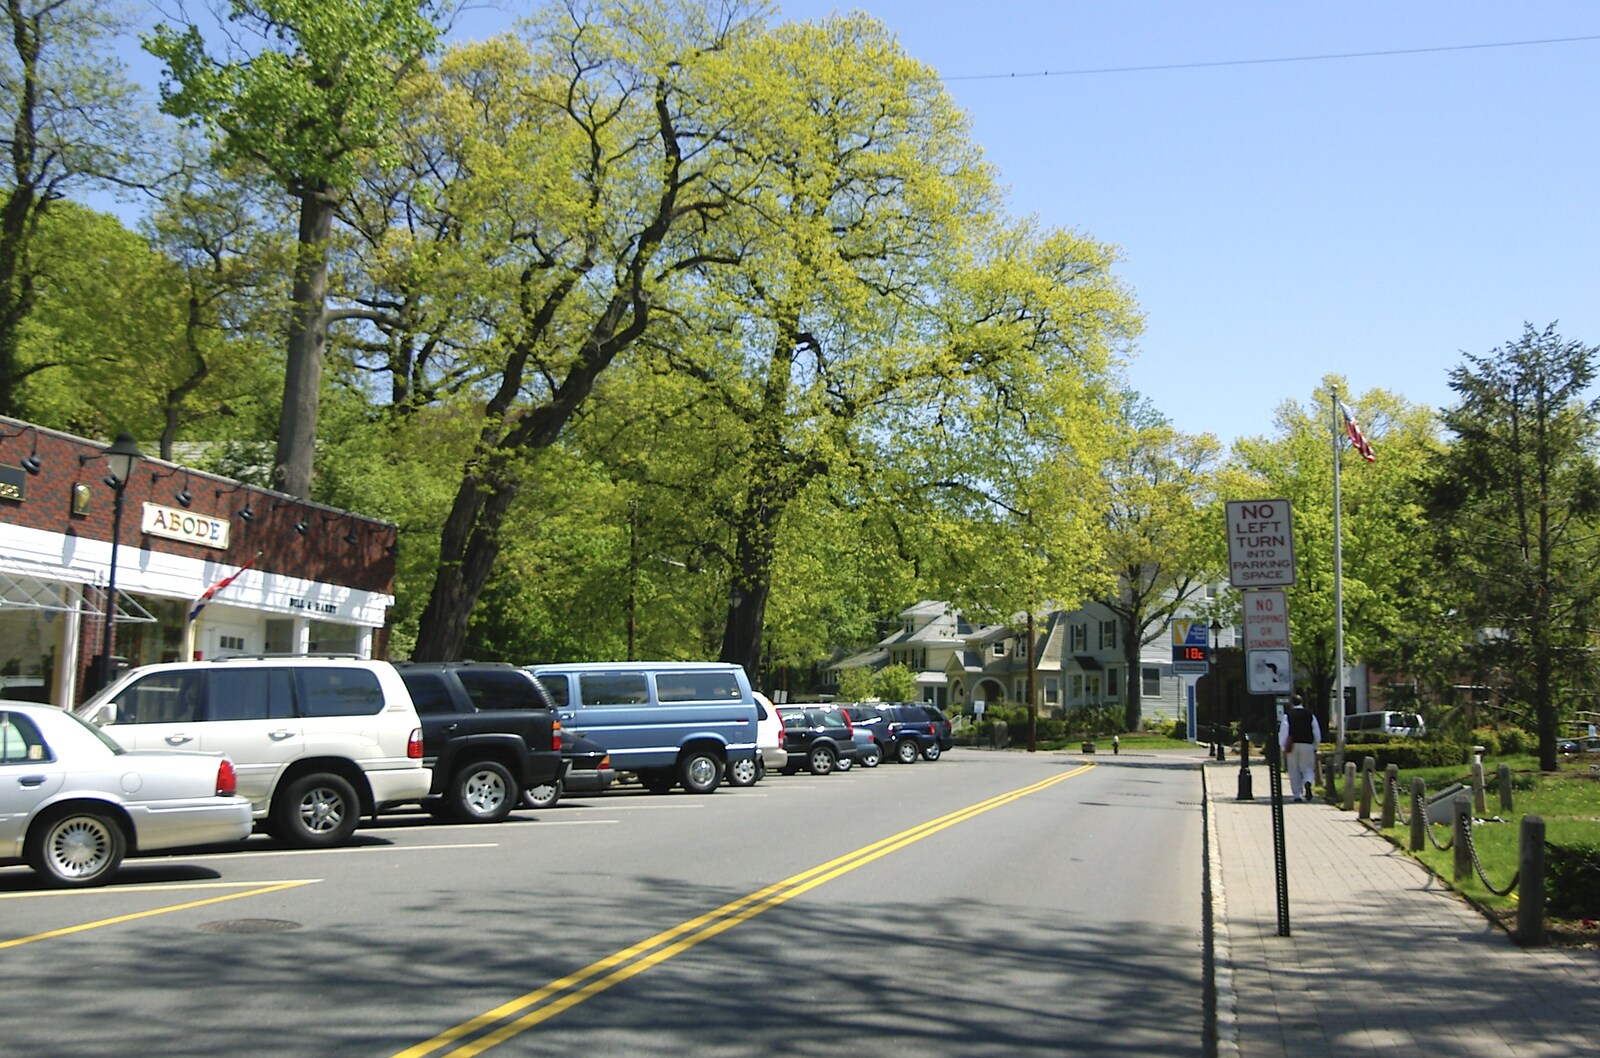 The leafy Main Street from Maplewood and Little-League Baseball, New Jersey - 29th April 2006